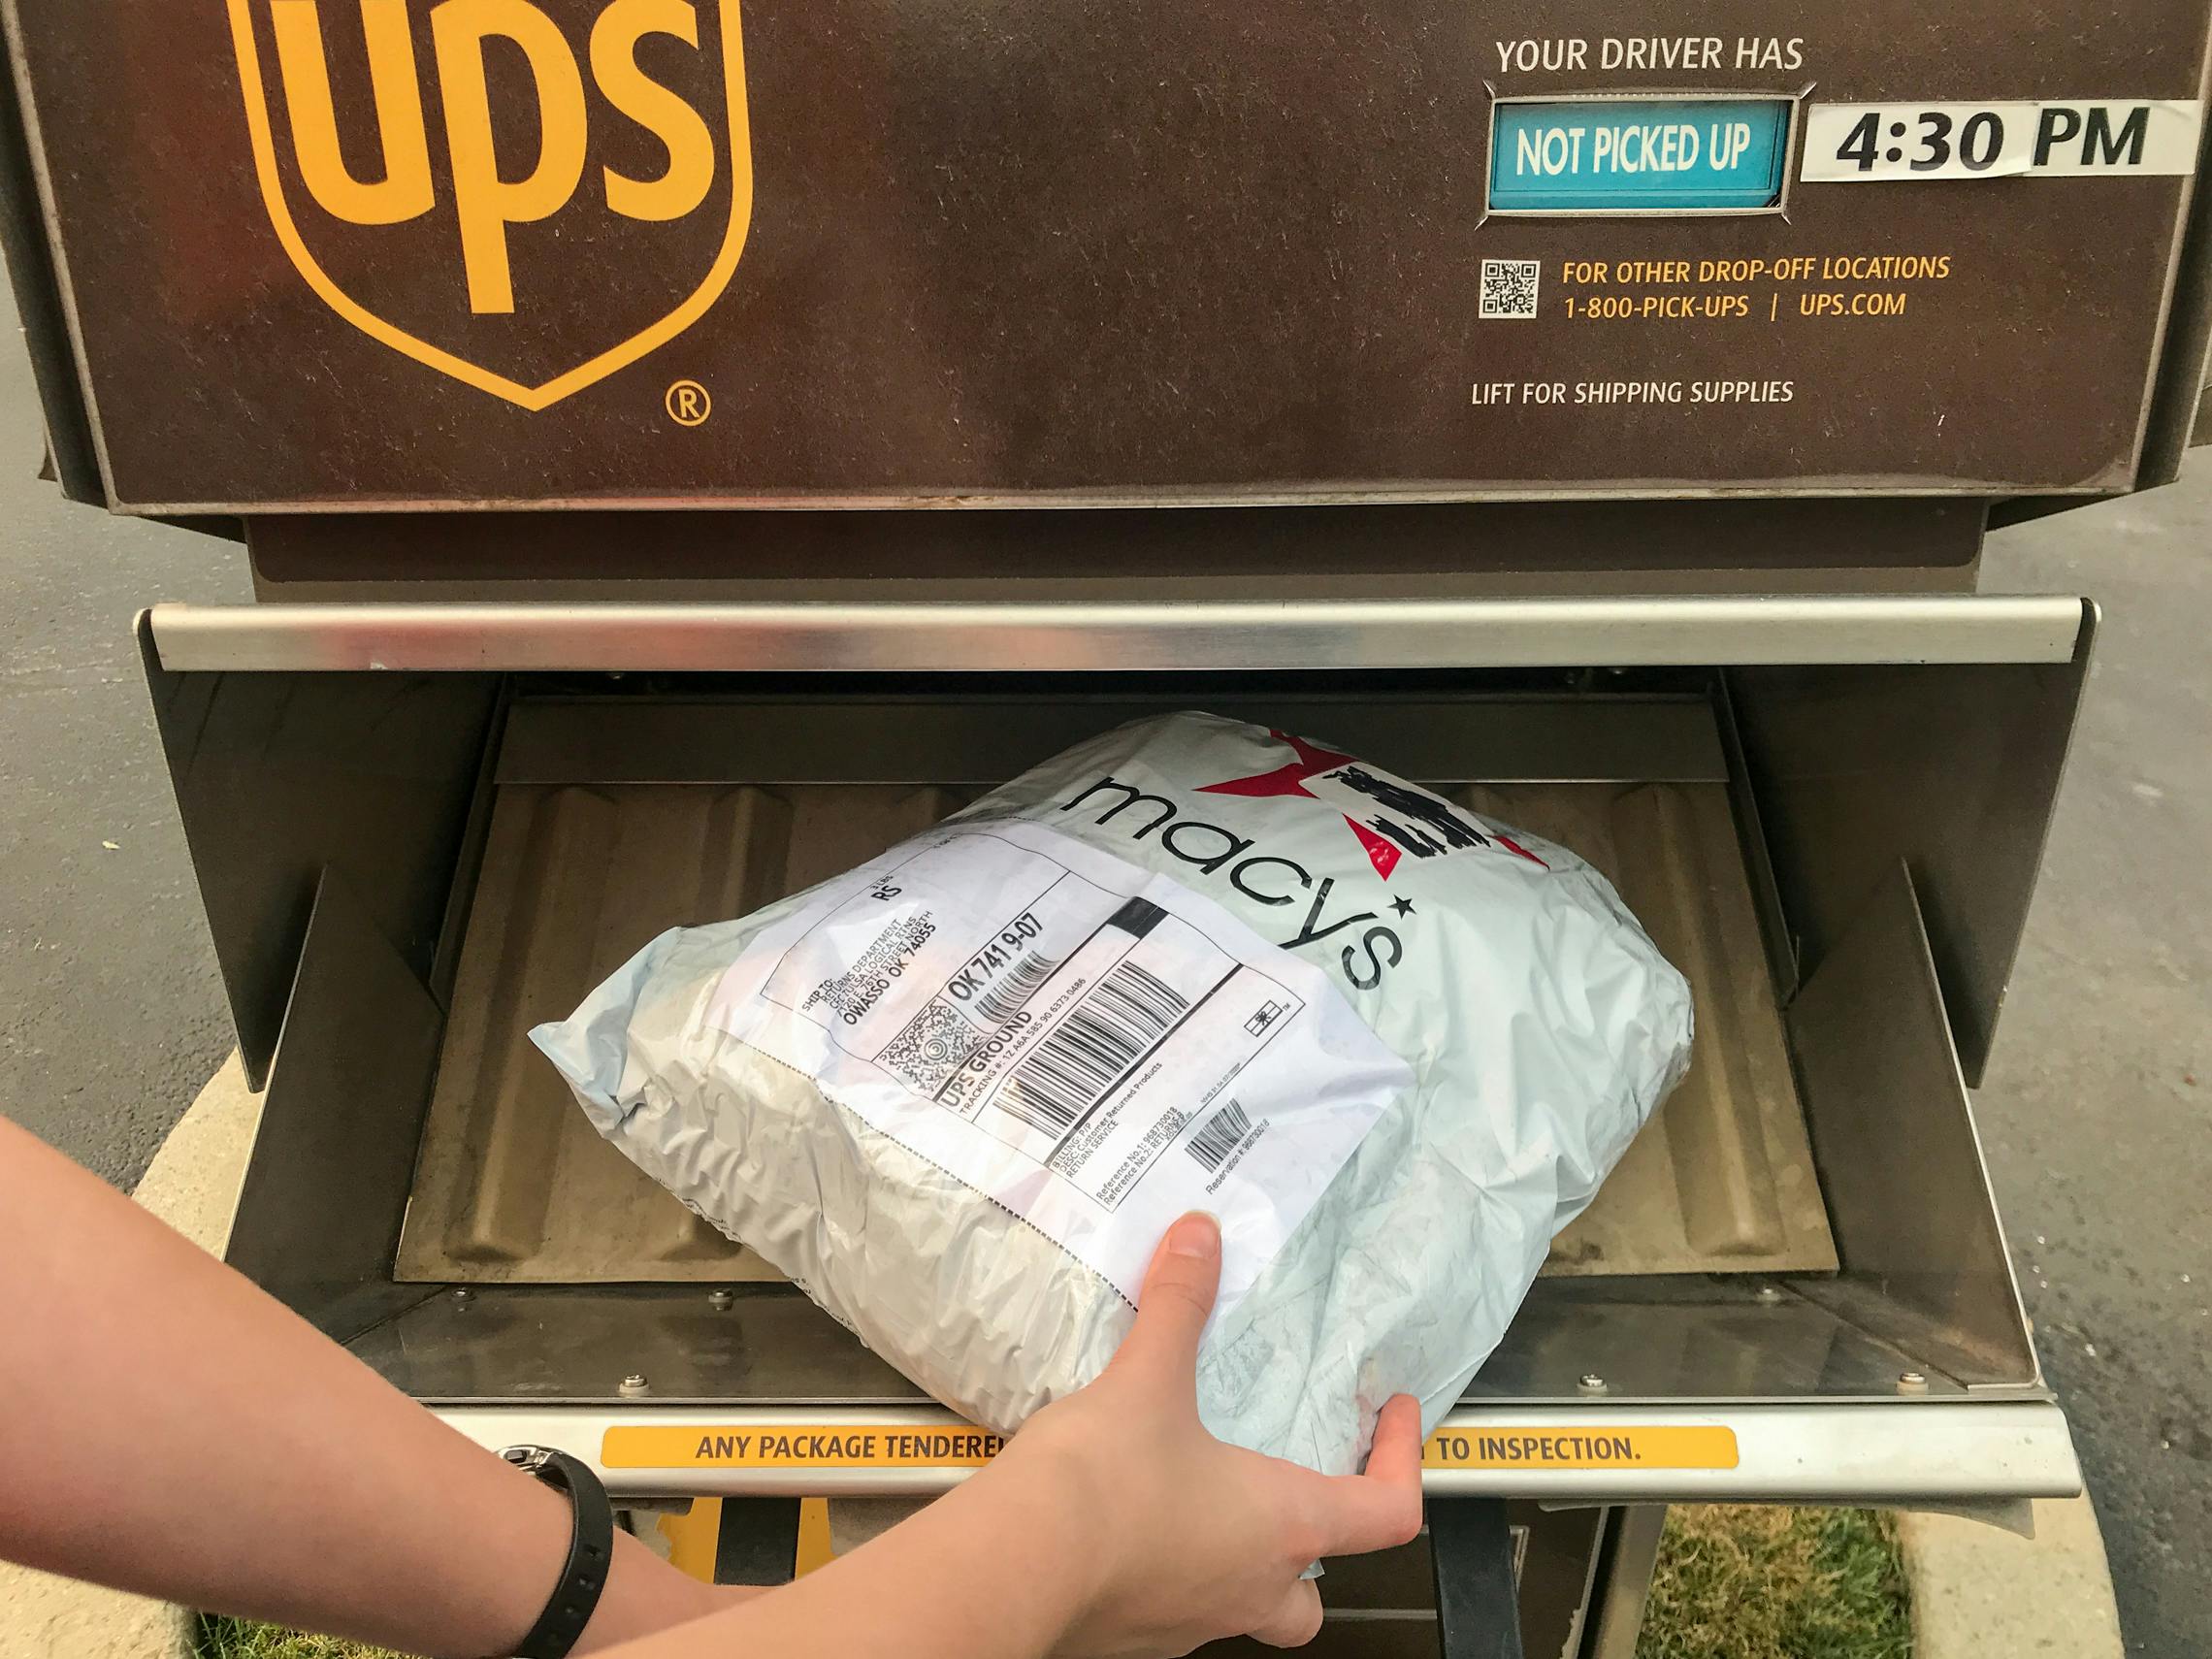 someone putting macys package in ups mailbox